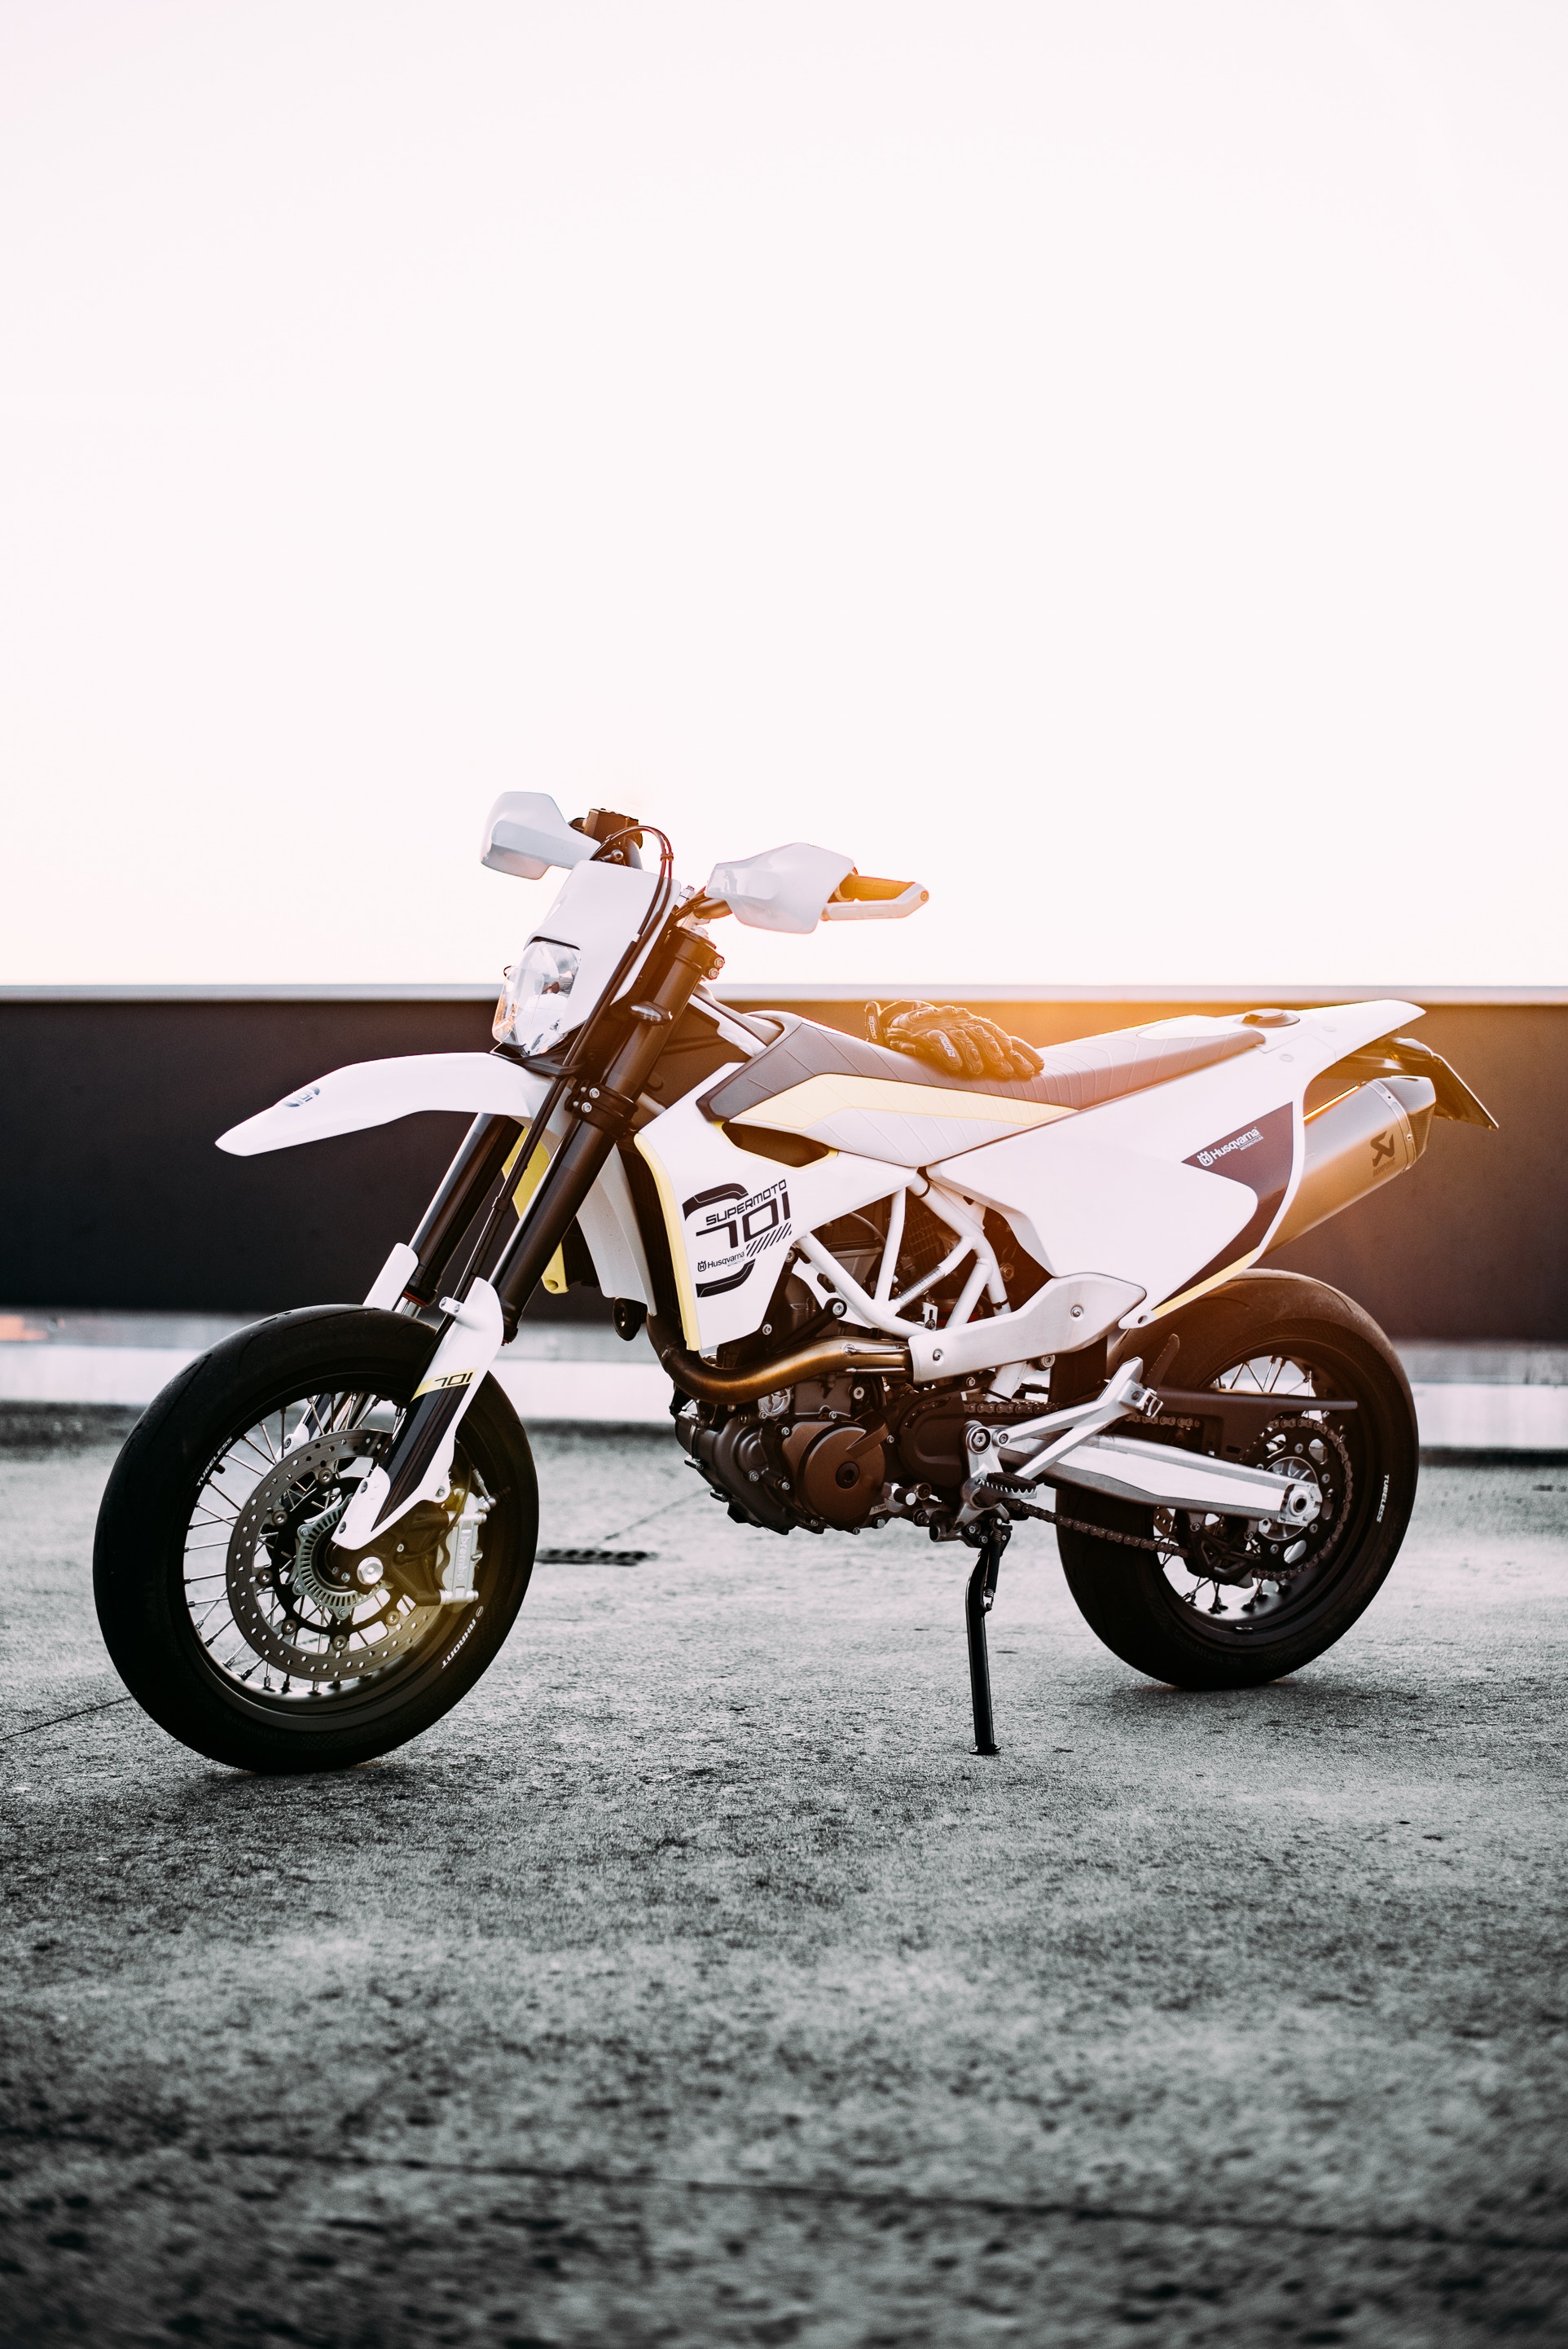 side view, motorcycles, white, motorcycle 2160p